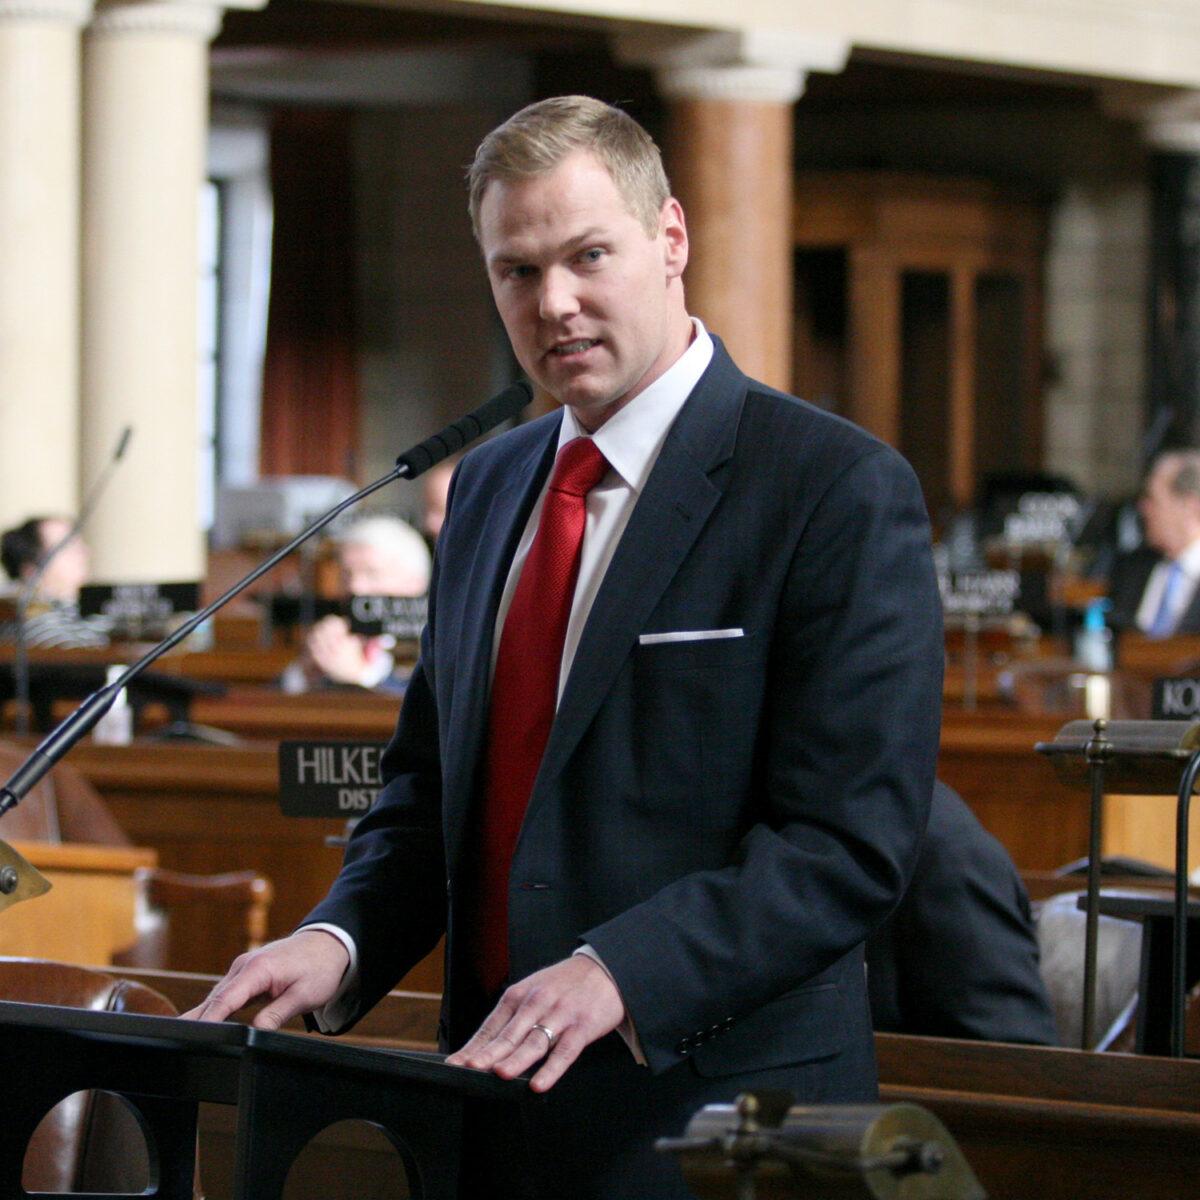 State Sen. Brett Lindstrom is considered the more moderate choice in the GOP primary. (Photo courtesy of Nebraska Legislature)